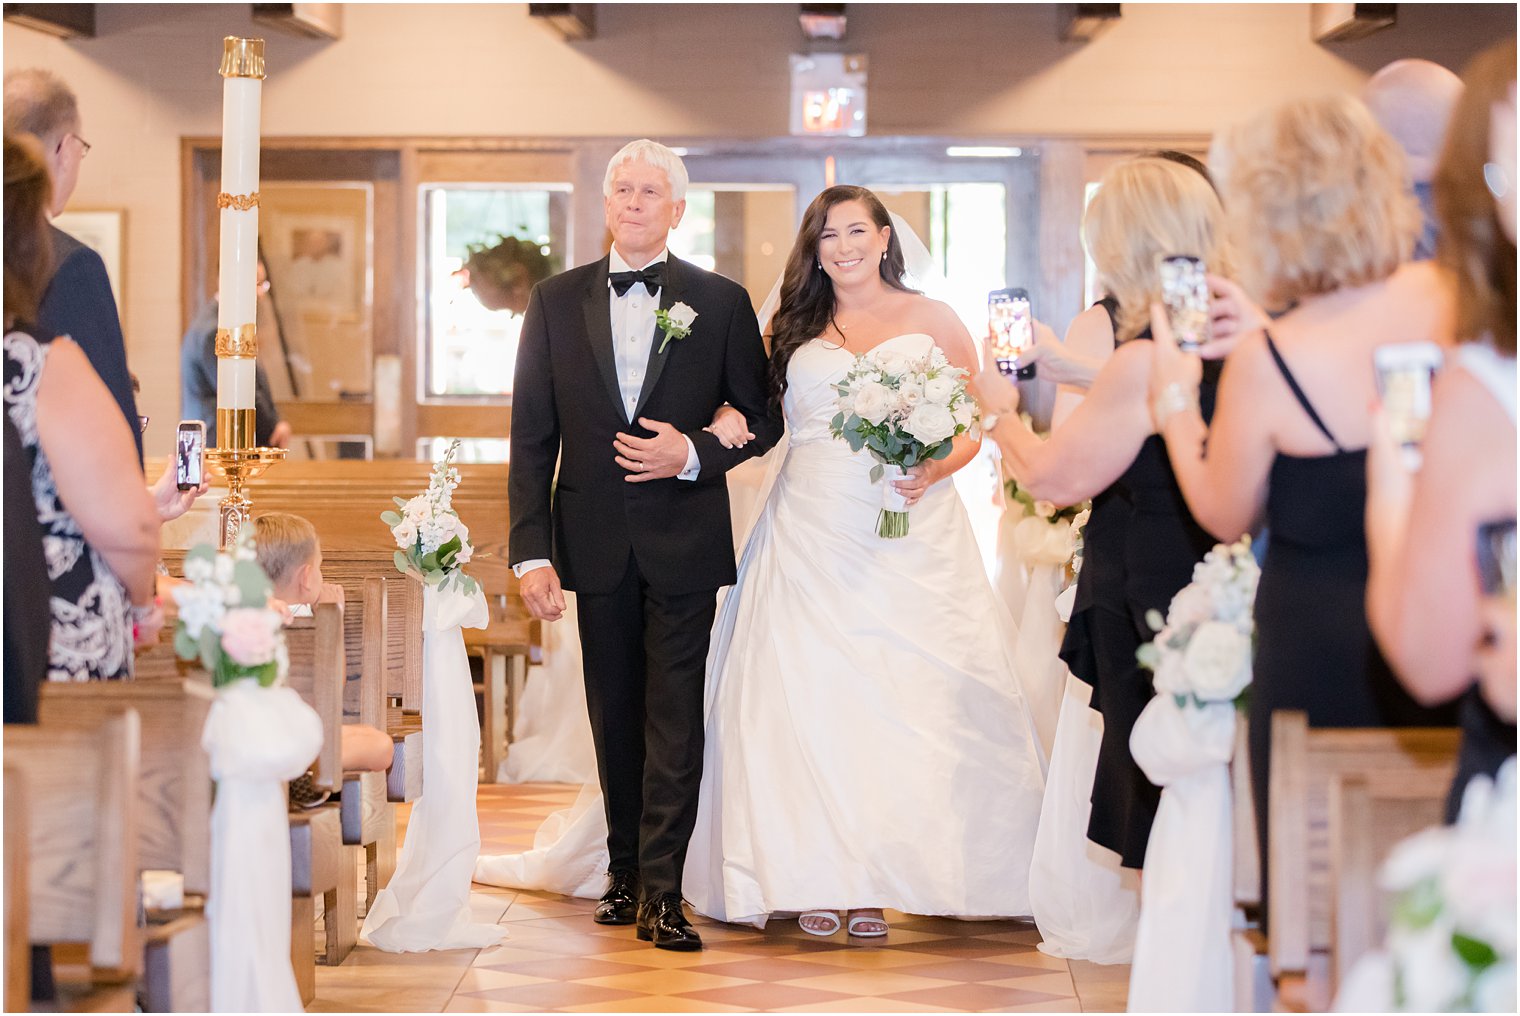 Bride walking down the aisle with her father at St. Luke's Church in Ho-Ho-Kus